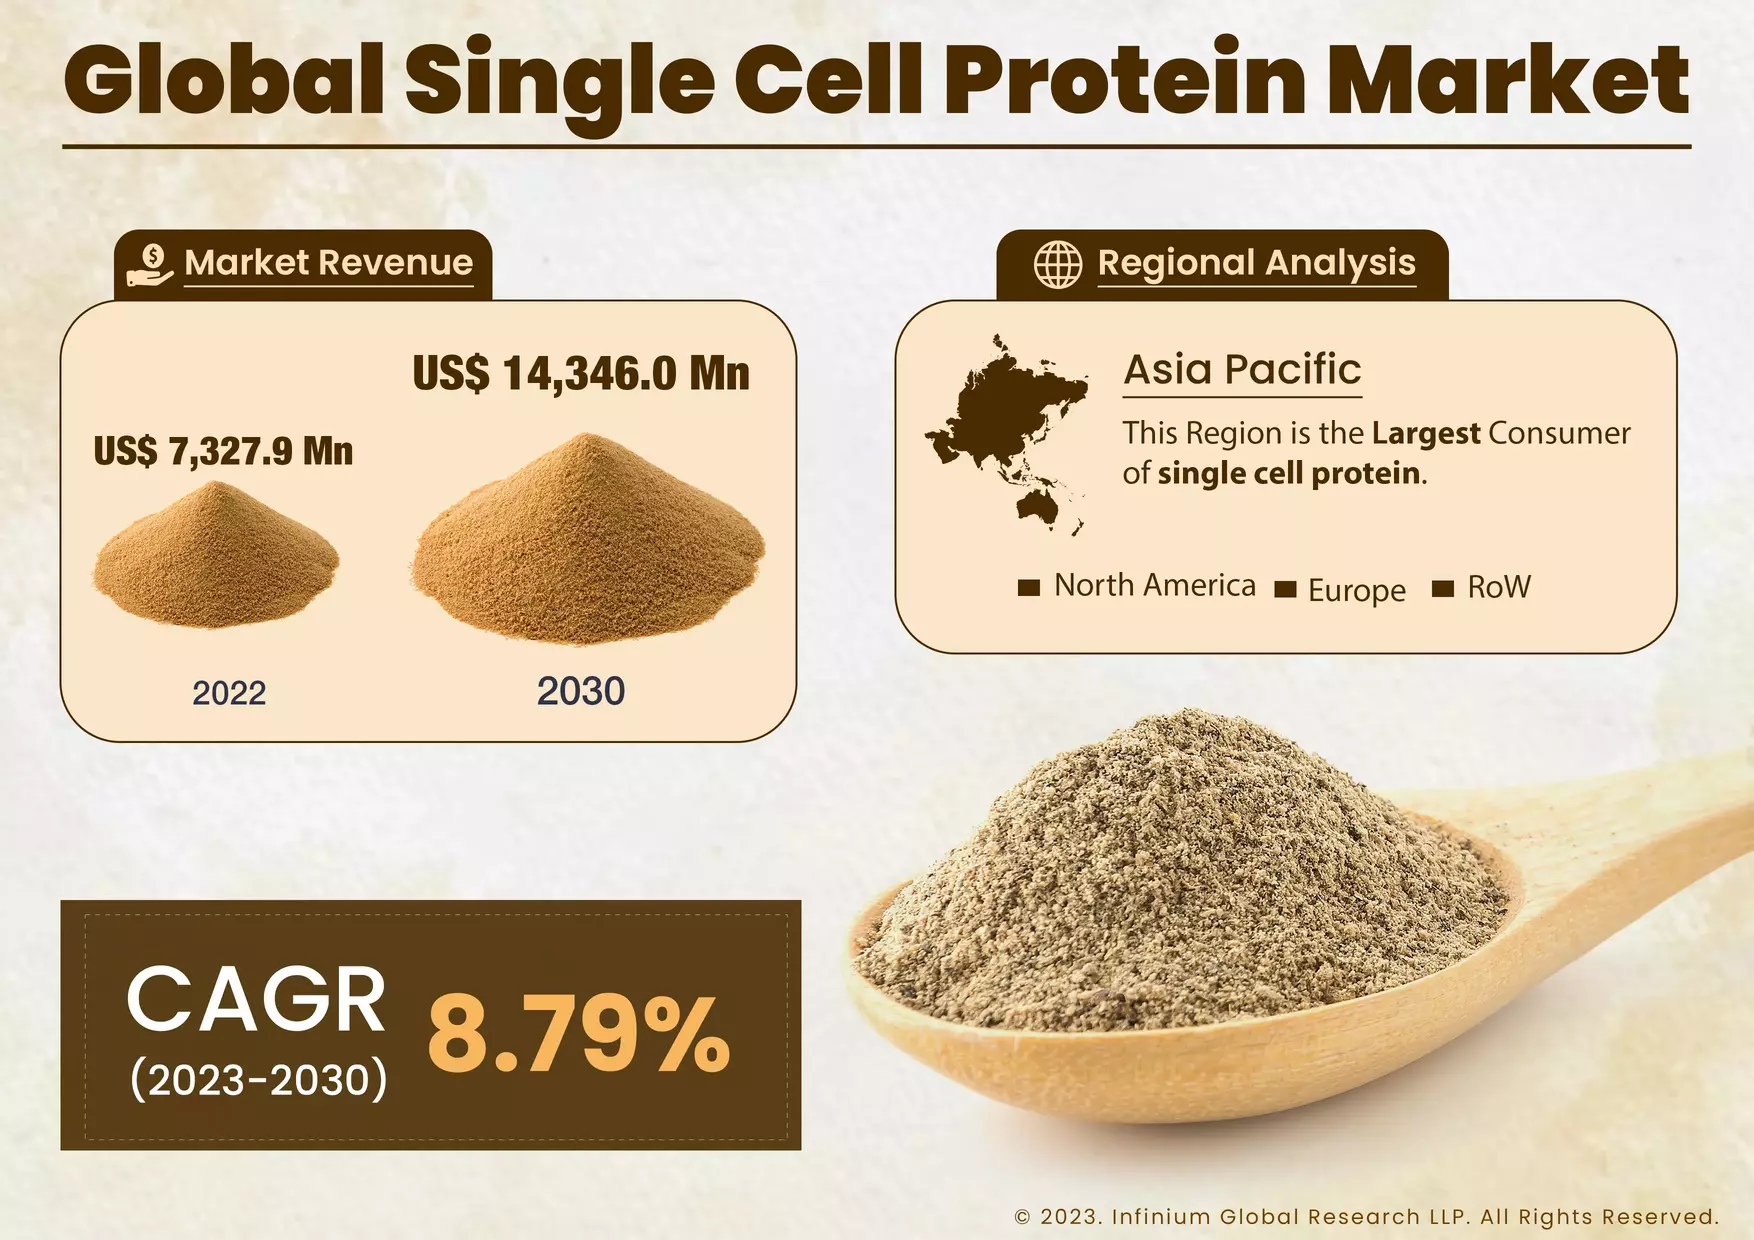 Global Single Cell Protein Market is Projected to Grow at a CAGR of 9% Over the Forecast Period of 2023-2030.